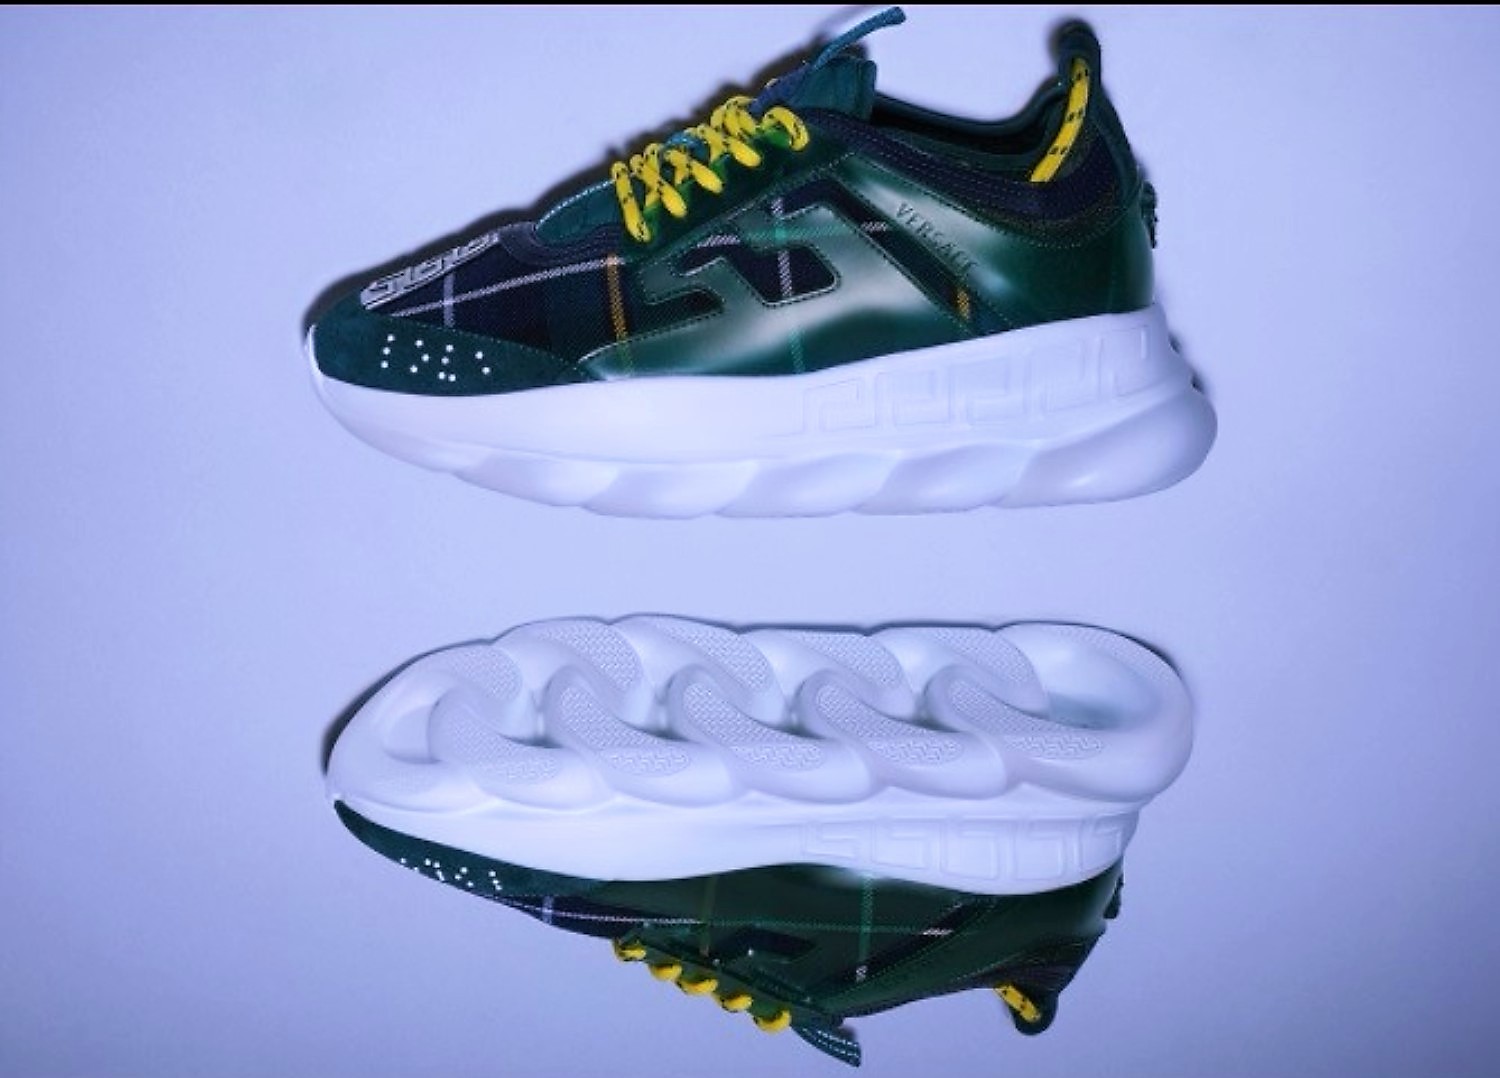 Editor's Pick: Versace's Sneaker Collaboration With 2Chainz